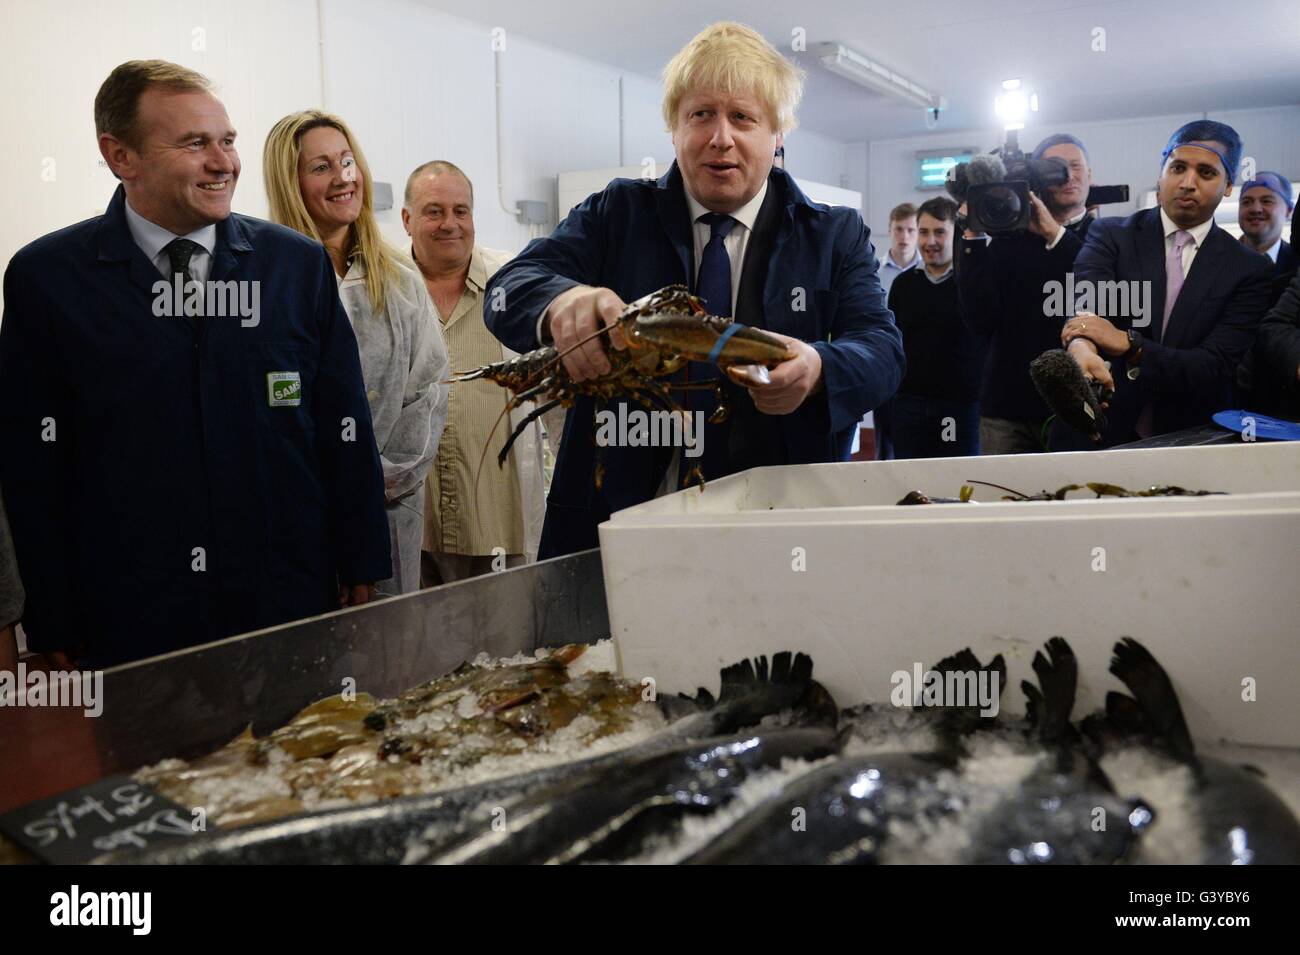 Boris Johnson MP visits Sam Cole Foods fish processing factory in Lowestoft, Suffolk, where he was campaigning on behalf of the Vote Leave EU campaign. Stock Photo